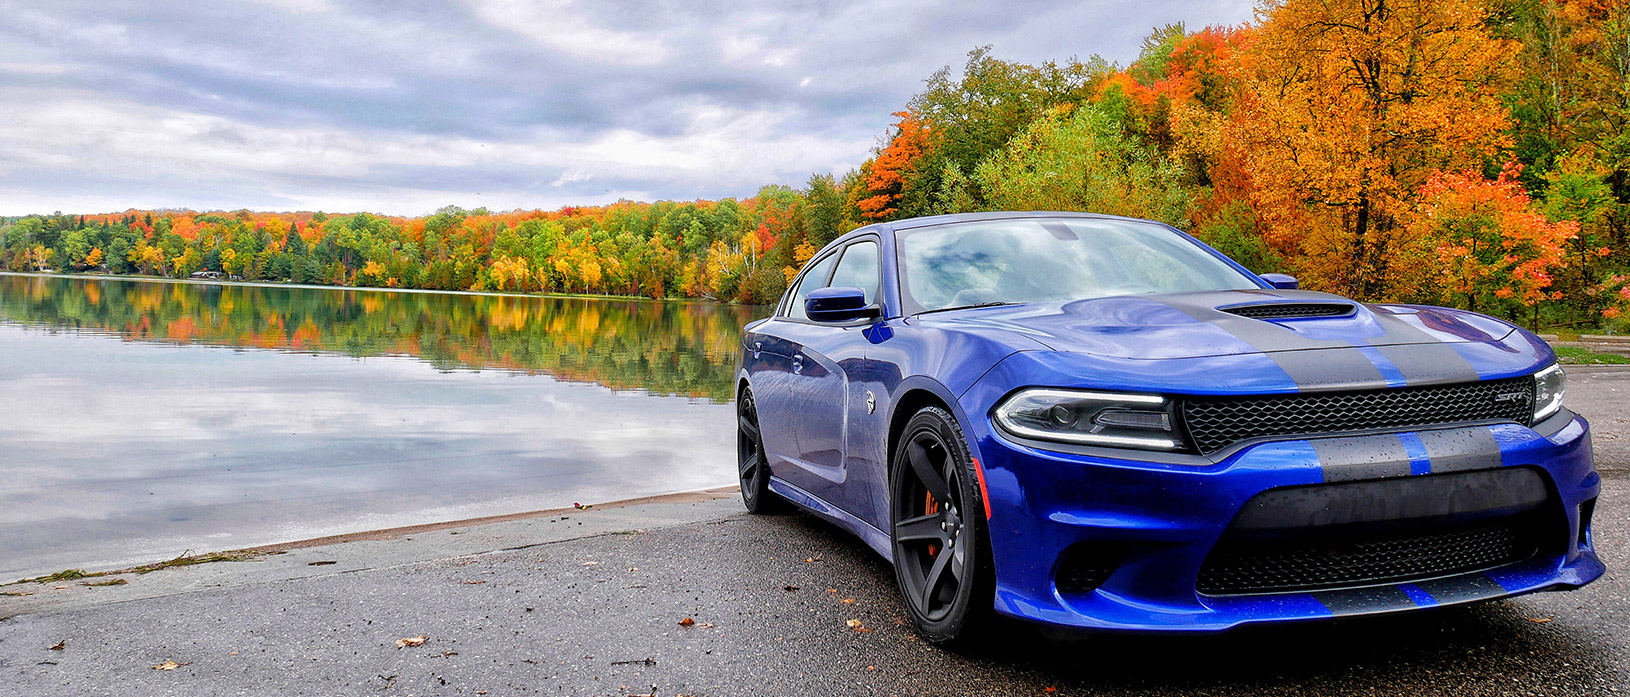 Blue 2018 Dodge Charger SRT Hellcat parked along a lake with color changing trees in background